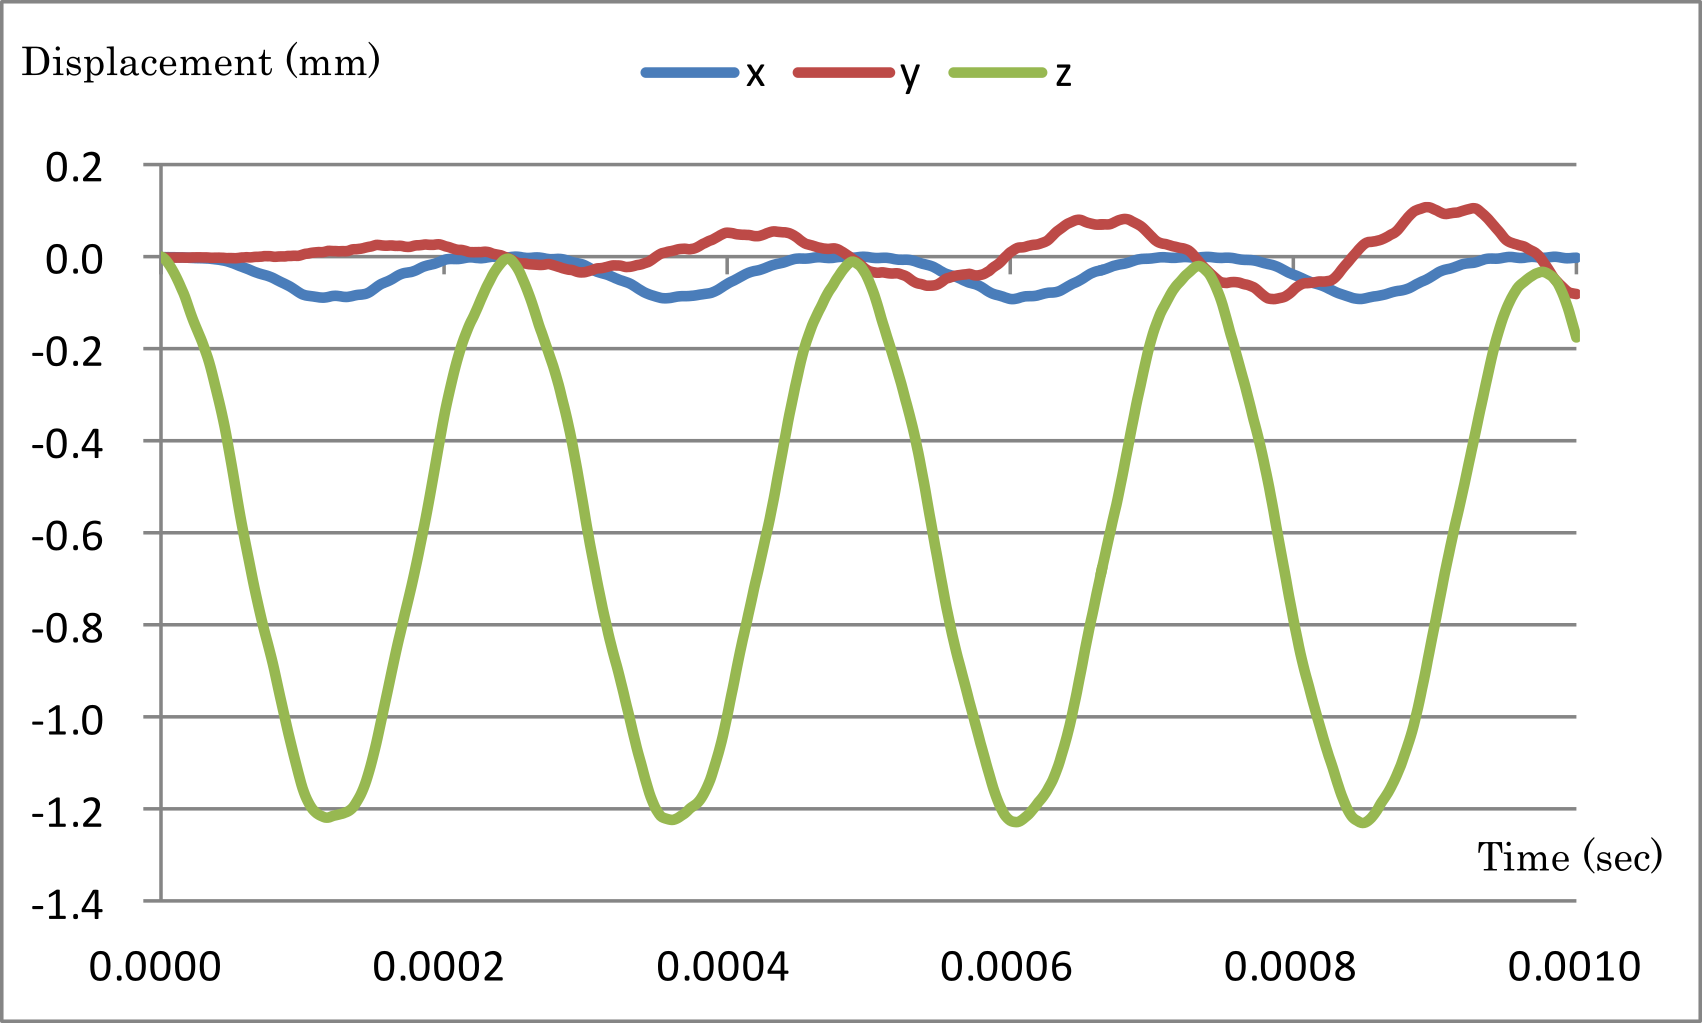 Time-series displacement of monitoring nodes